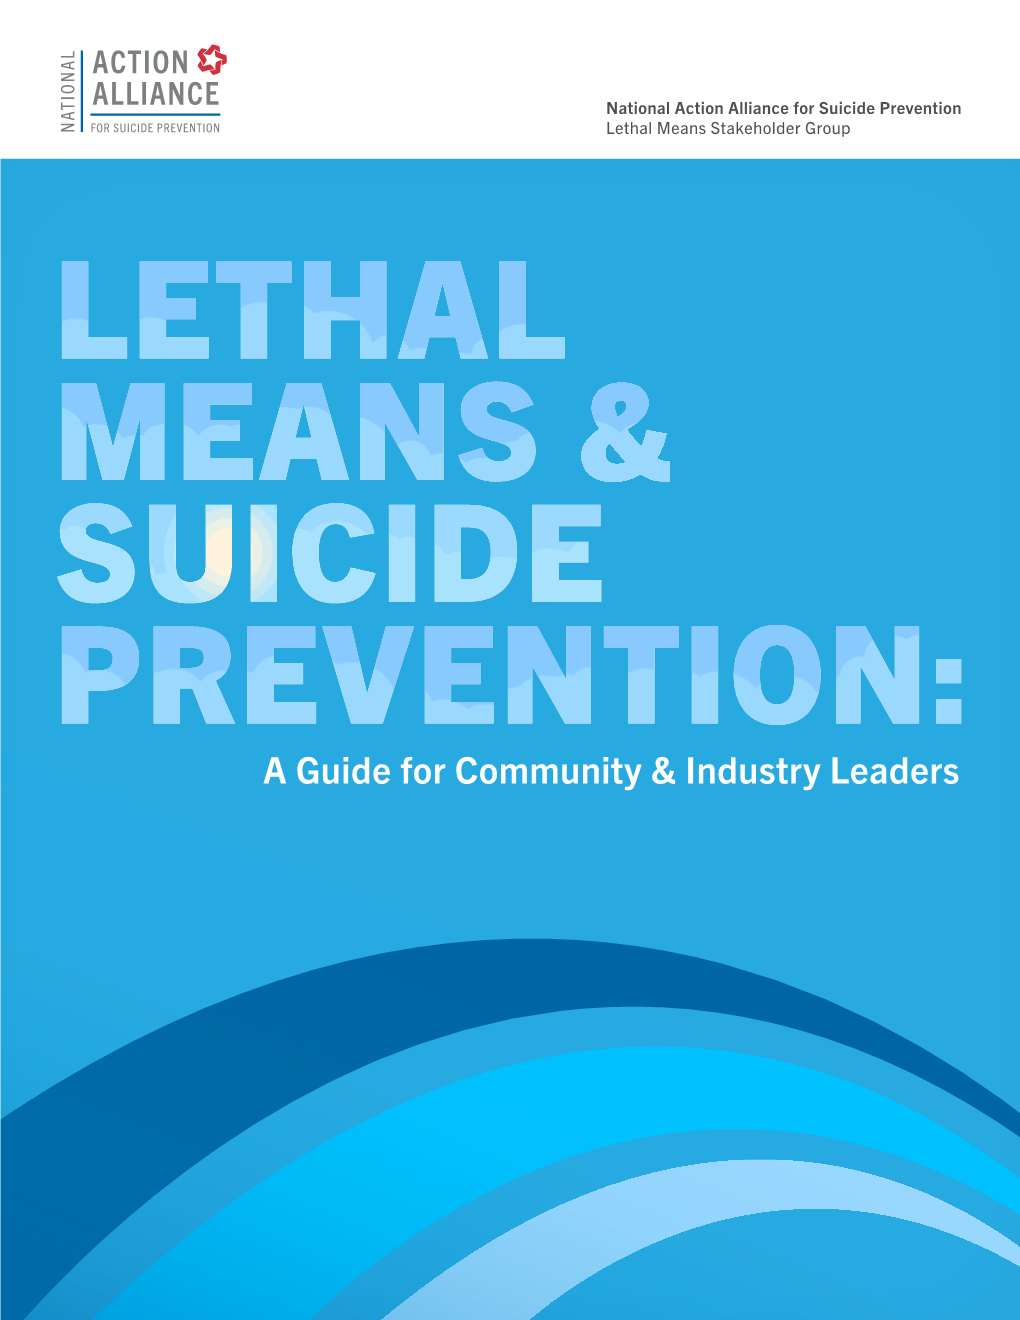 Lethal Means & Suicide Prevention: a Guide for Community & Industry